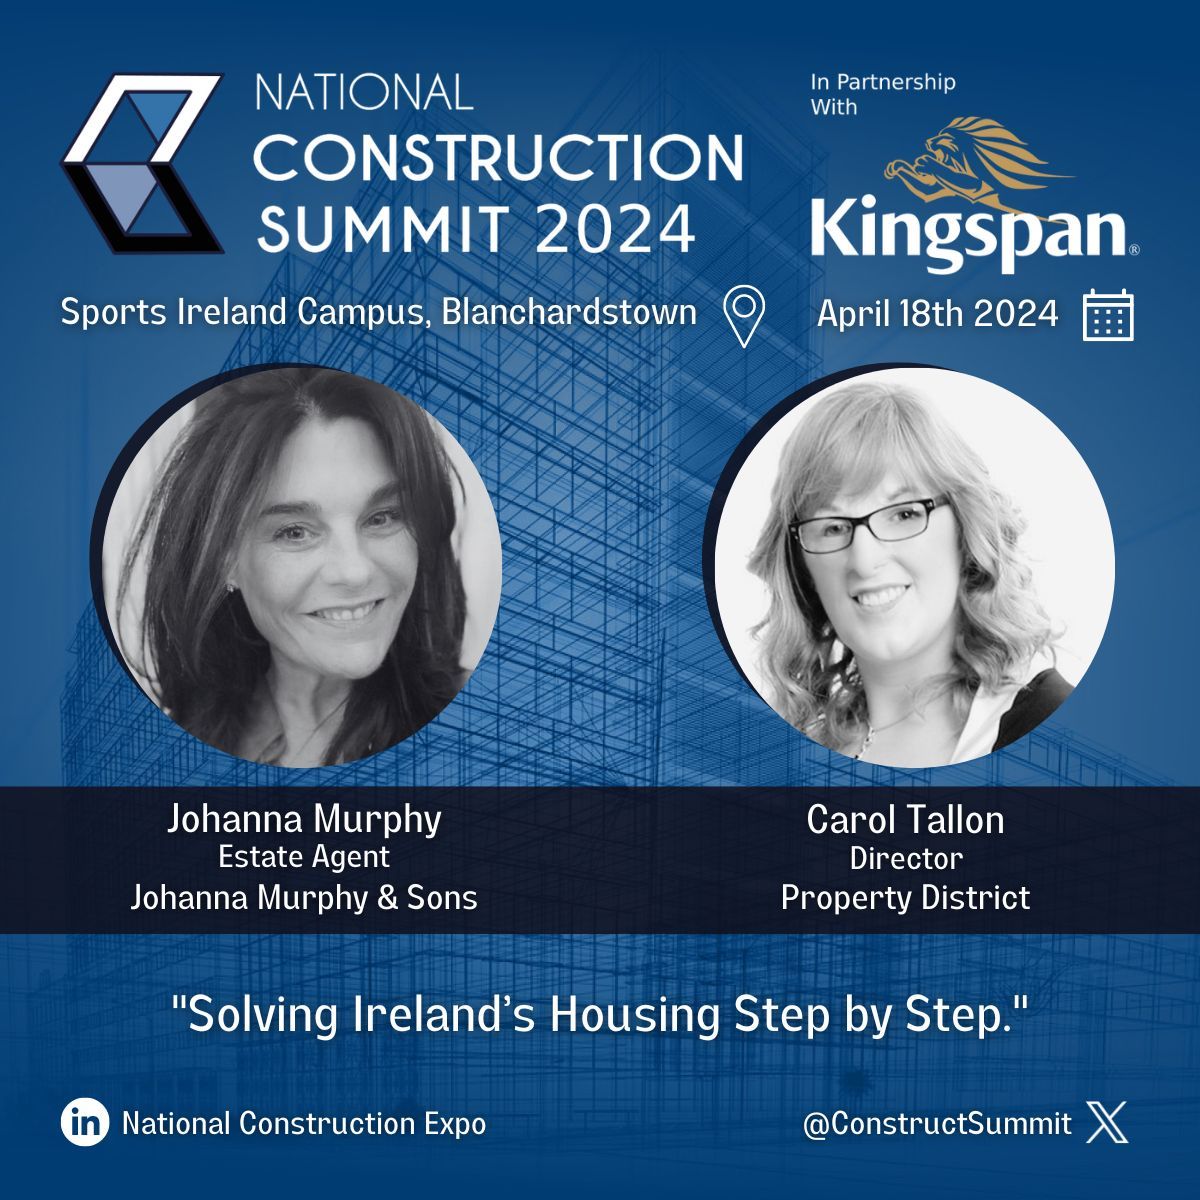 Excited to be joining Carol Tallon as a guest speaker at the National Construction Summit this Thursday!
 Join us and be part of the conversation! 🏠 

Register here 👇
nationalconstructionsummit.ie/register/

#NationalConstructionSummit #HousingSolutions #Ireland